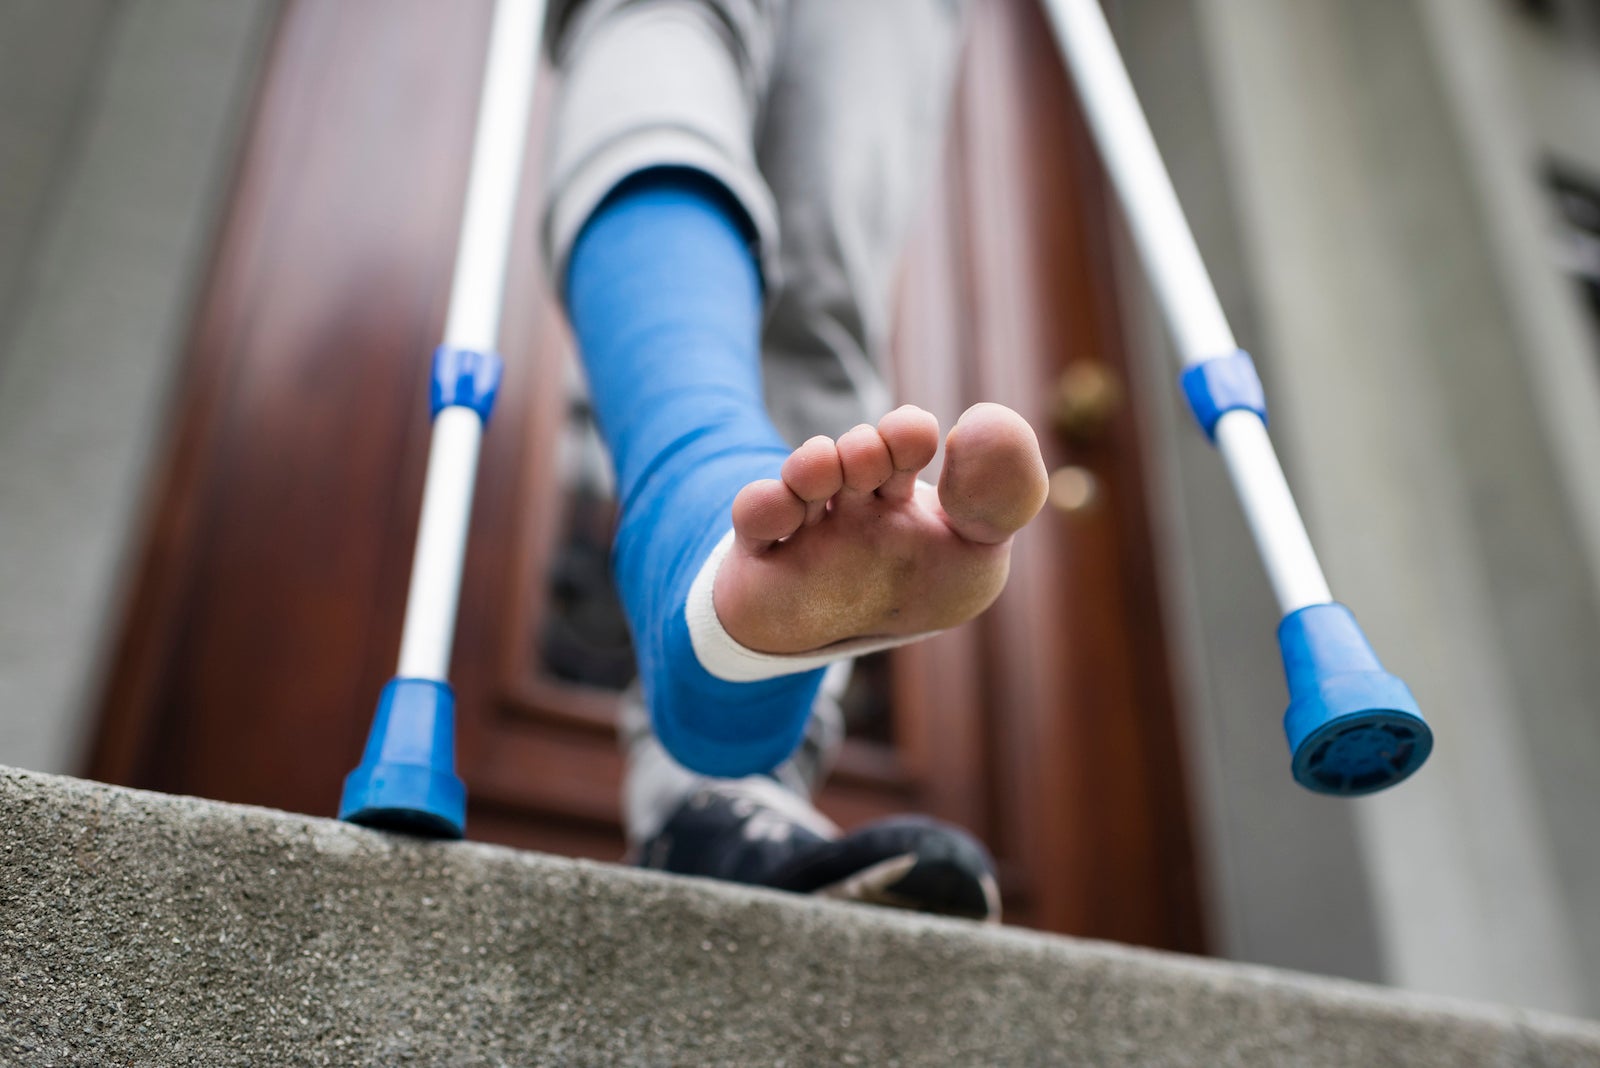 An image of a person with an injured leg